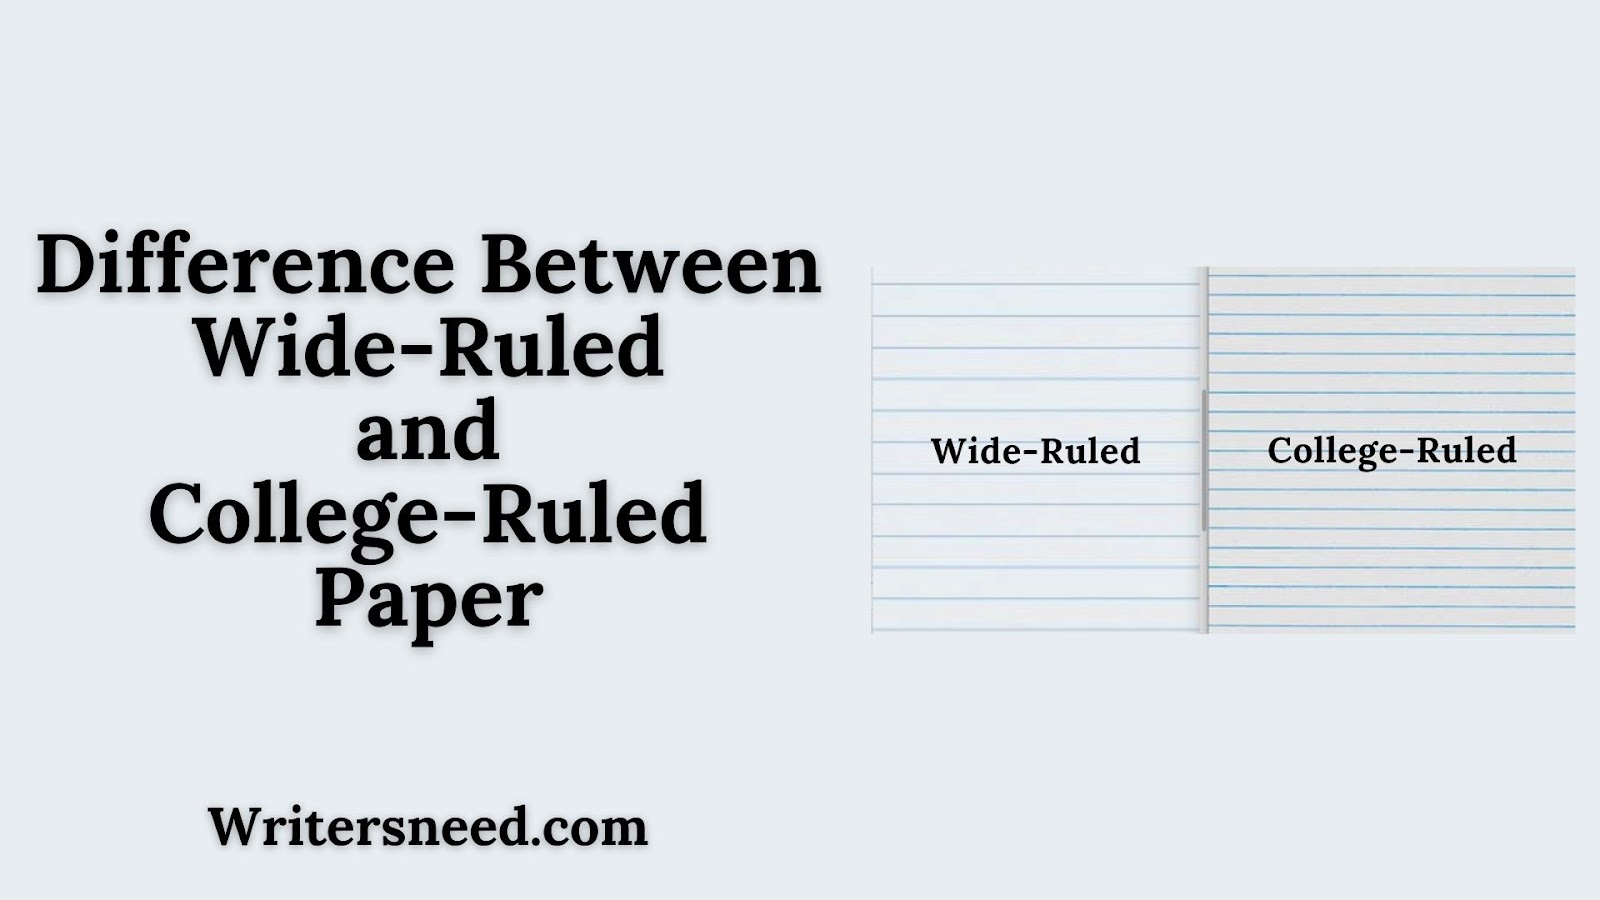 Difference Between Wide-Ruled and College-Ruled Paper